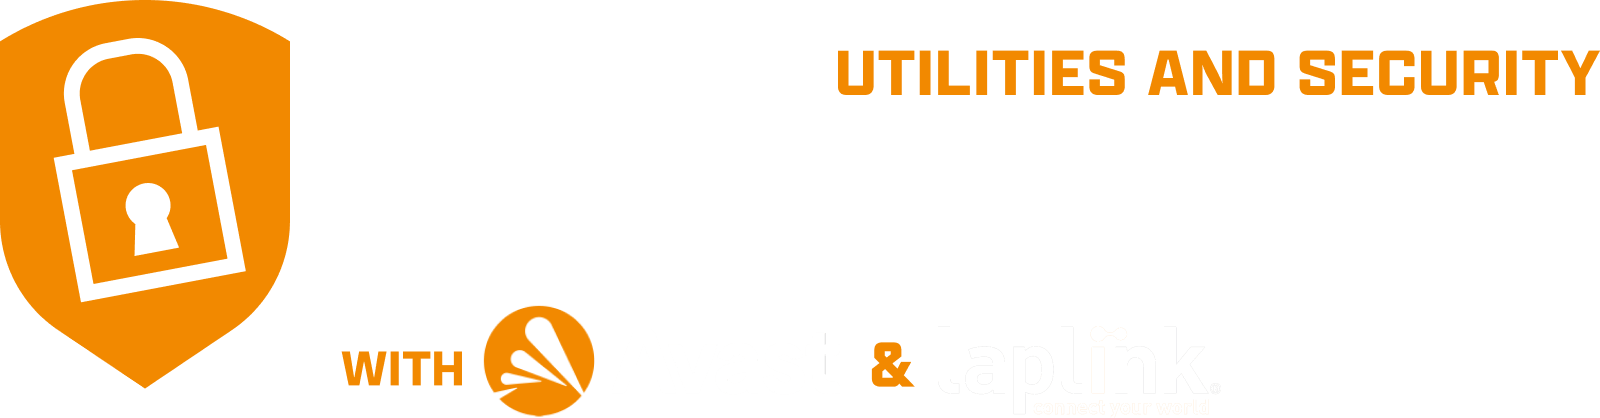 PC Utility and Security Tools with Avast & Laplink